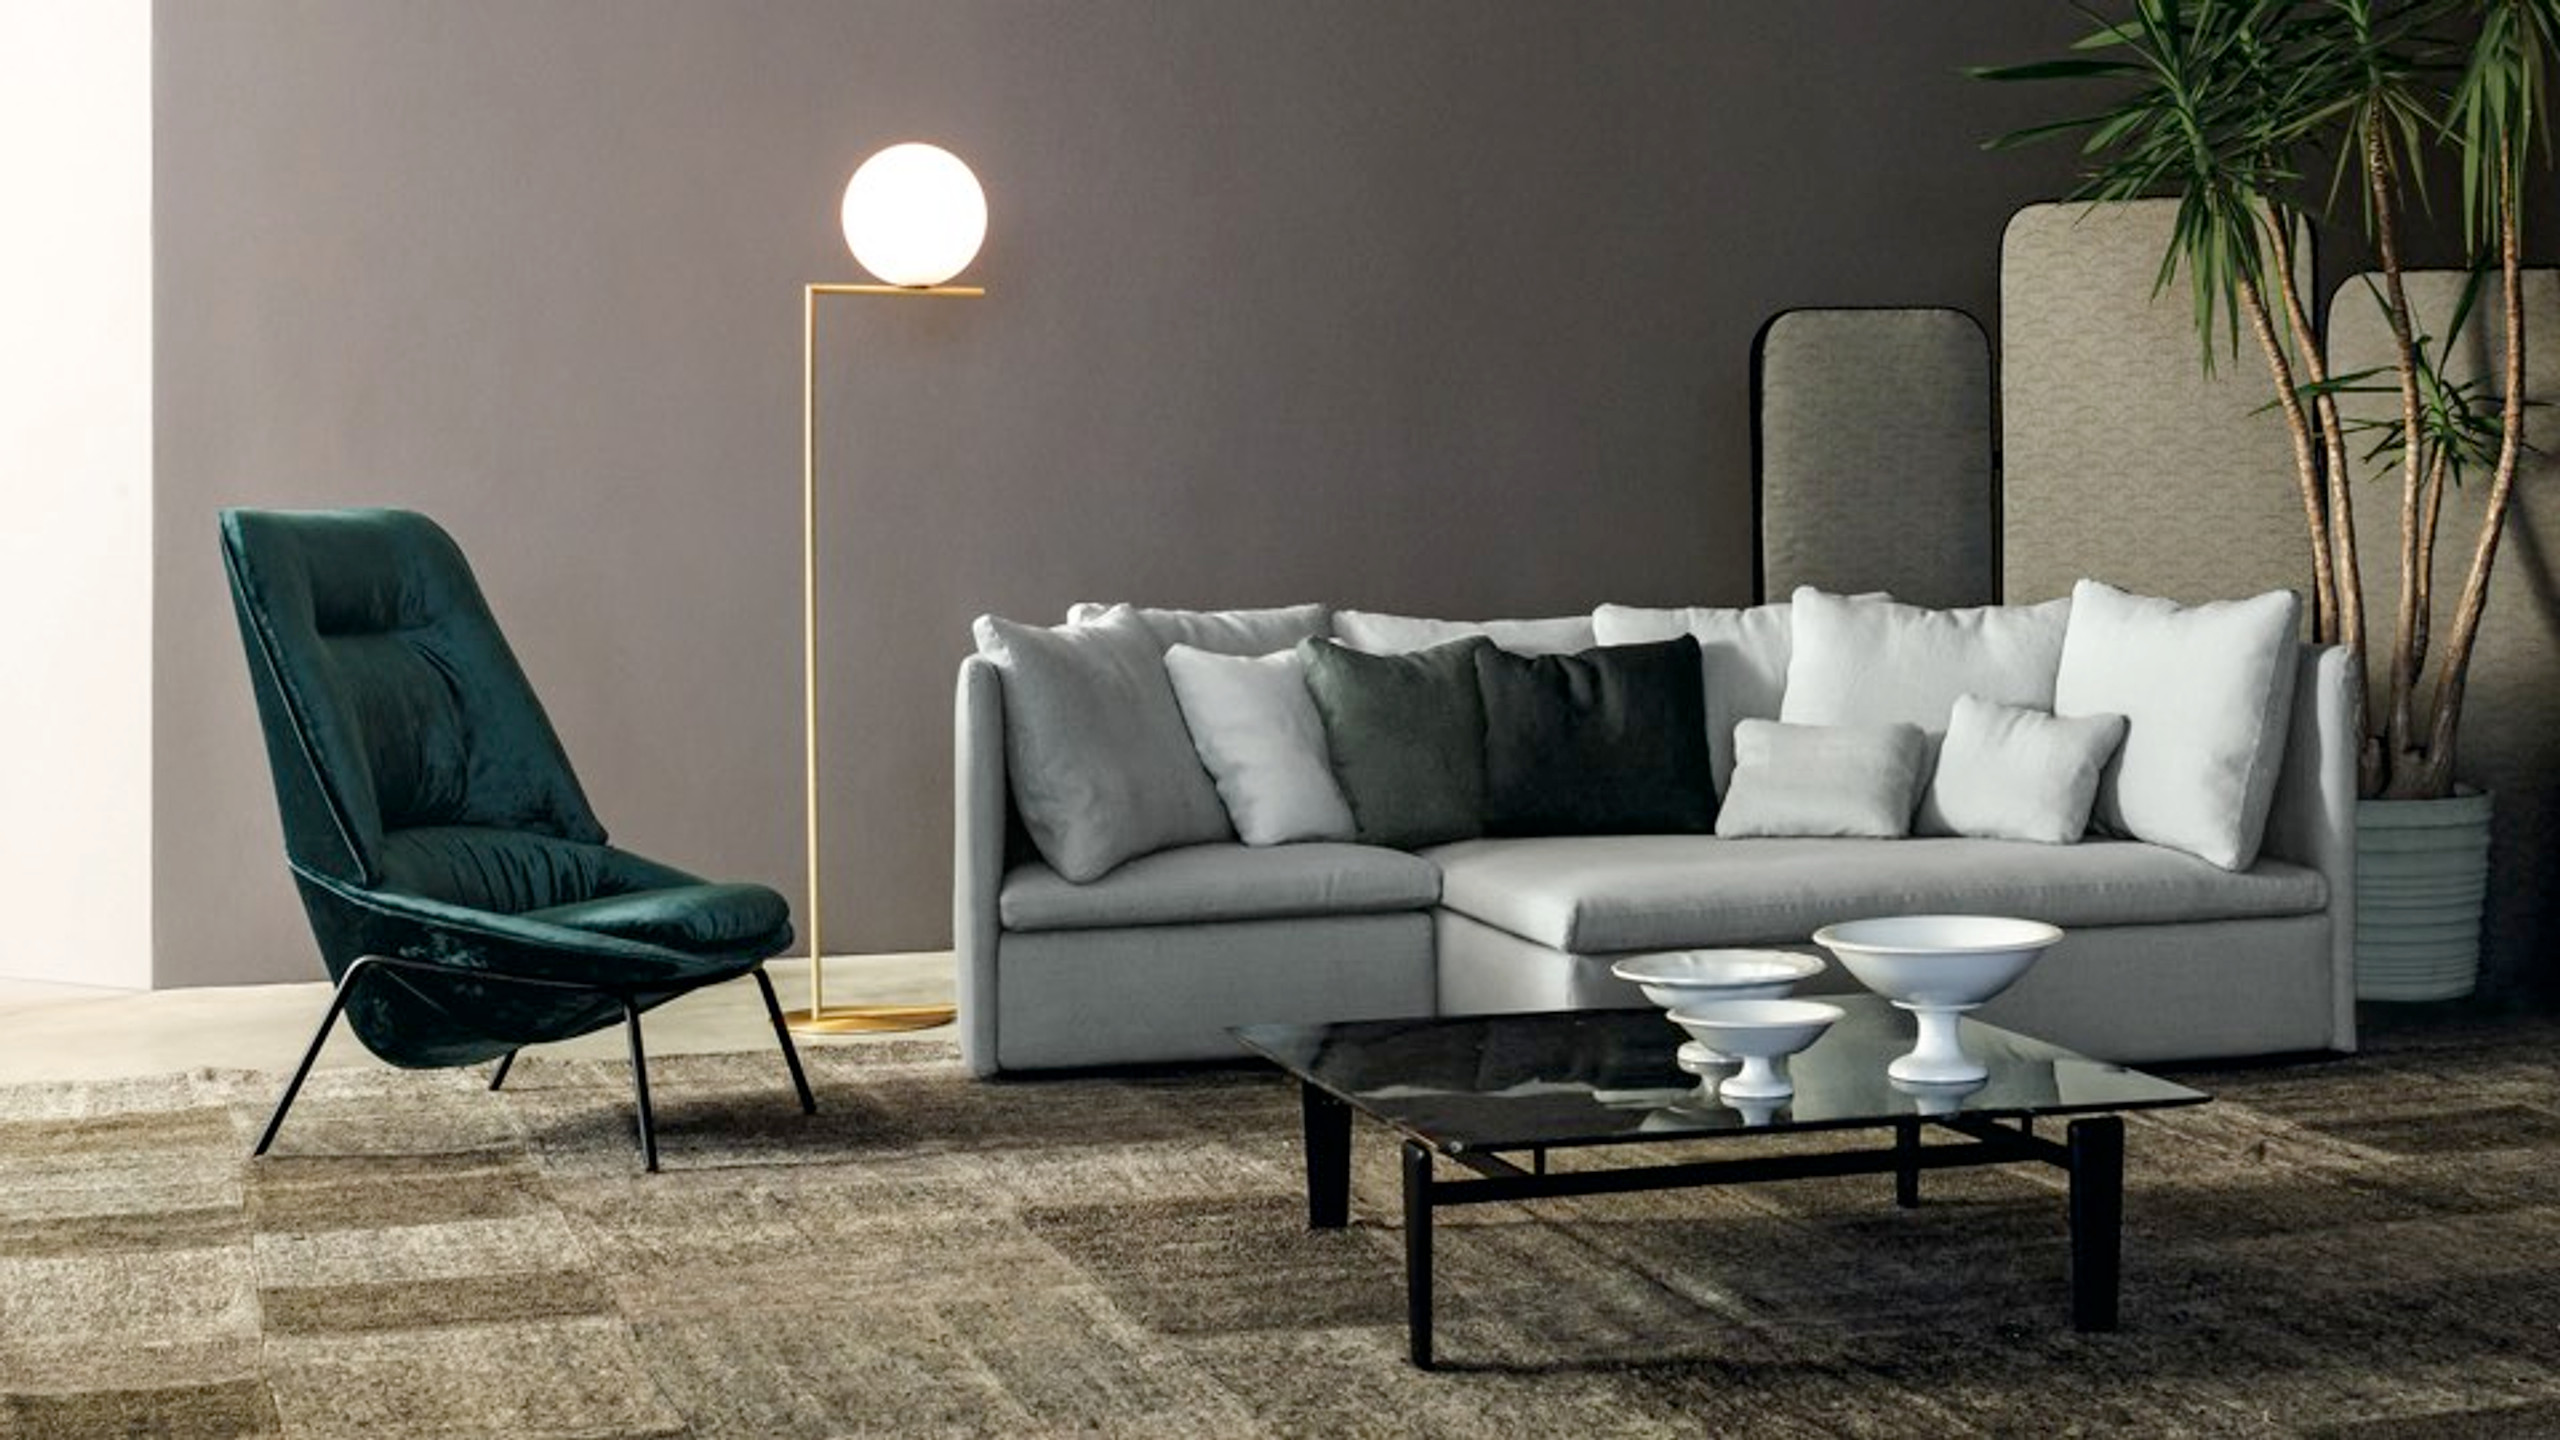 5 Contemporary Lighting Trends To Try At Home This AW19